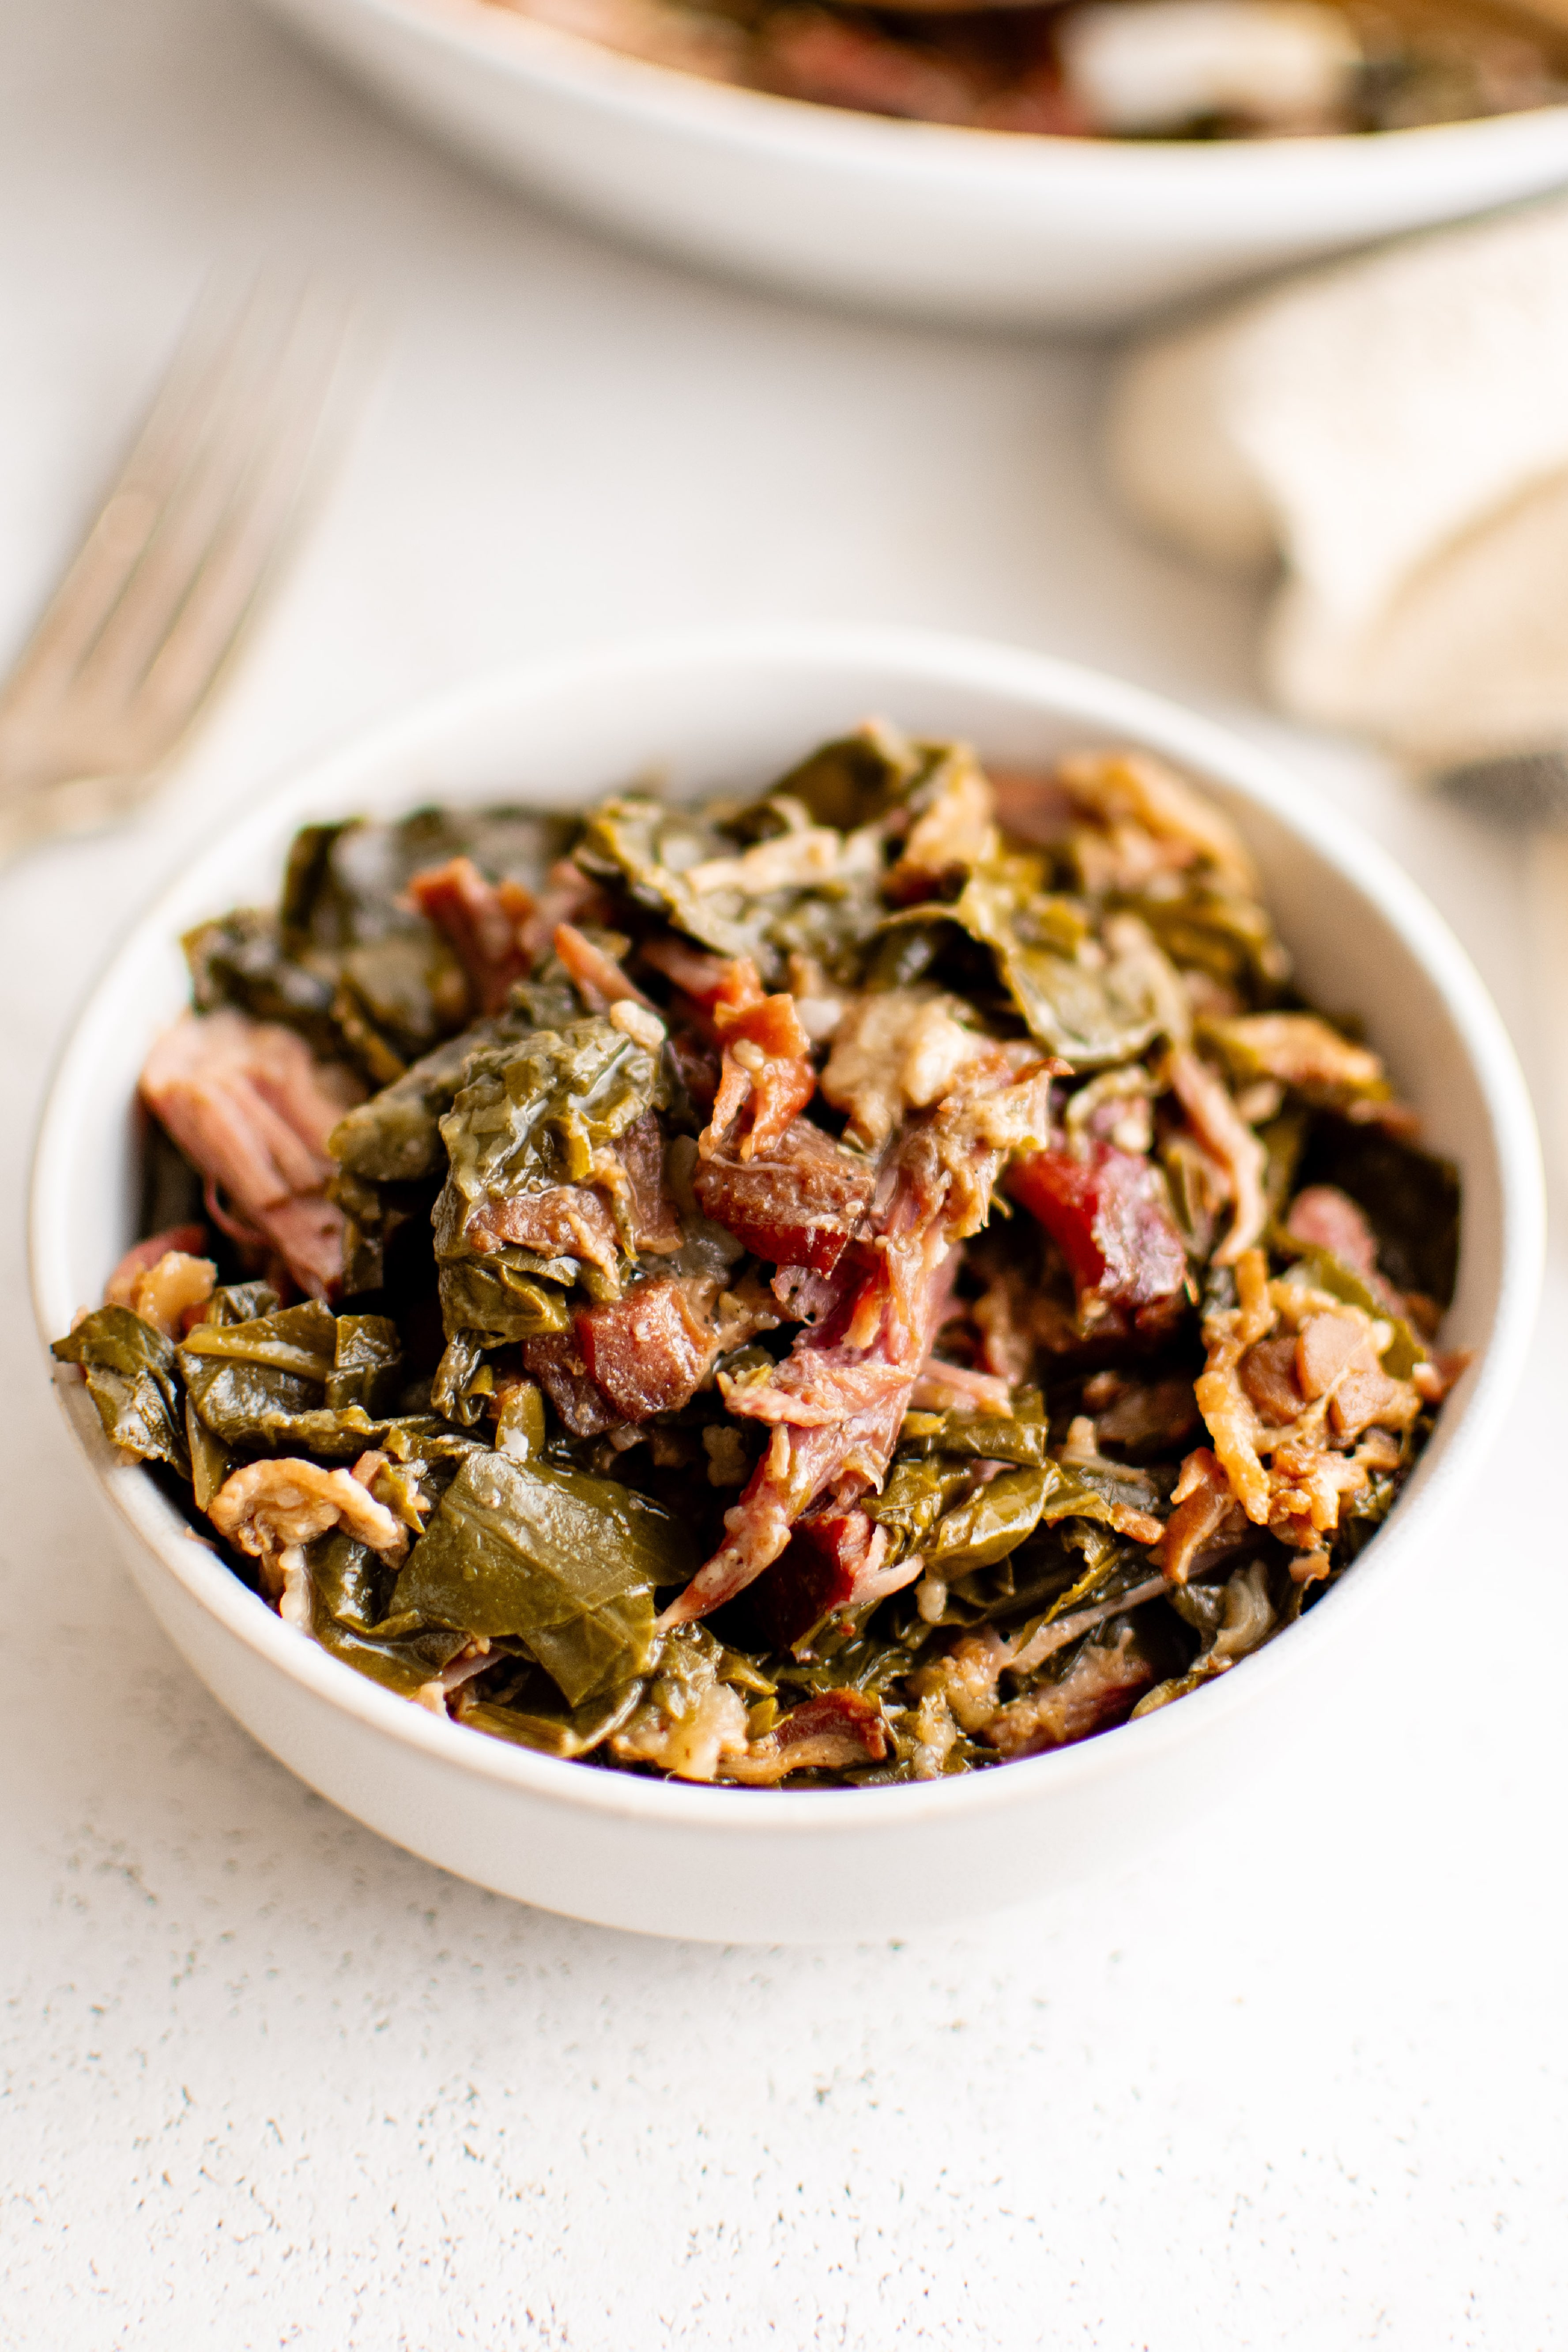 Small white serving bowl filled with cooked collard greens with shredded cooked ham hock and bacon.